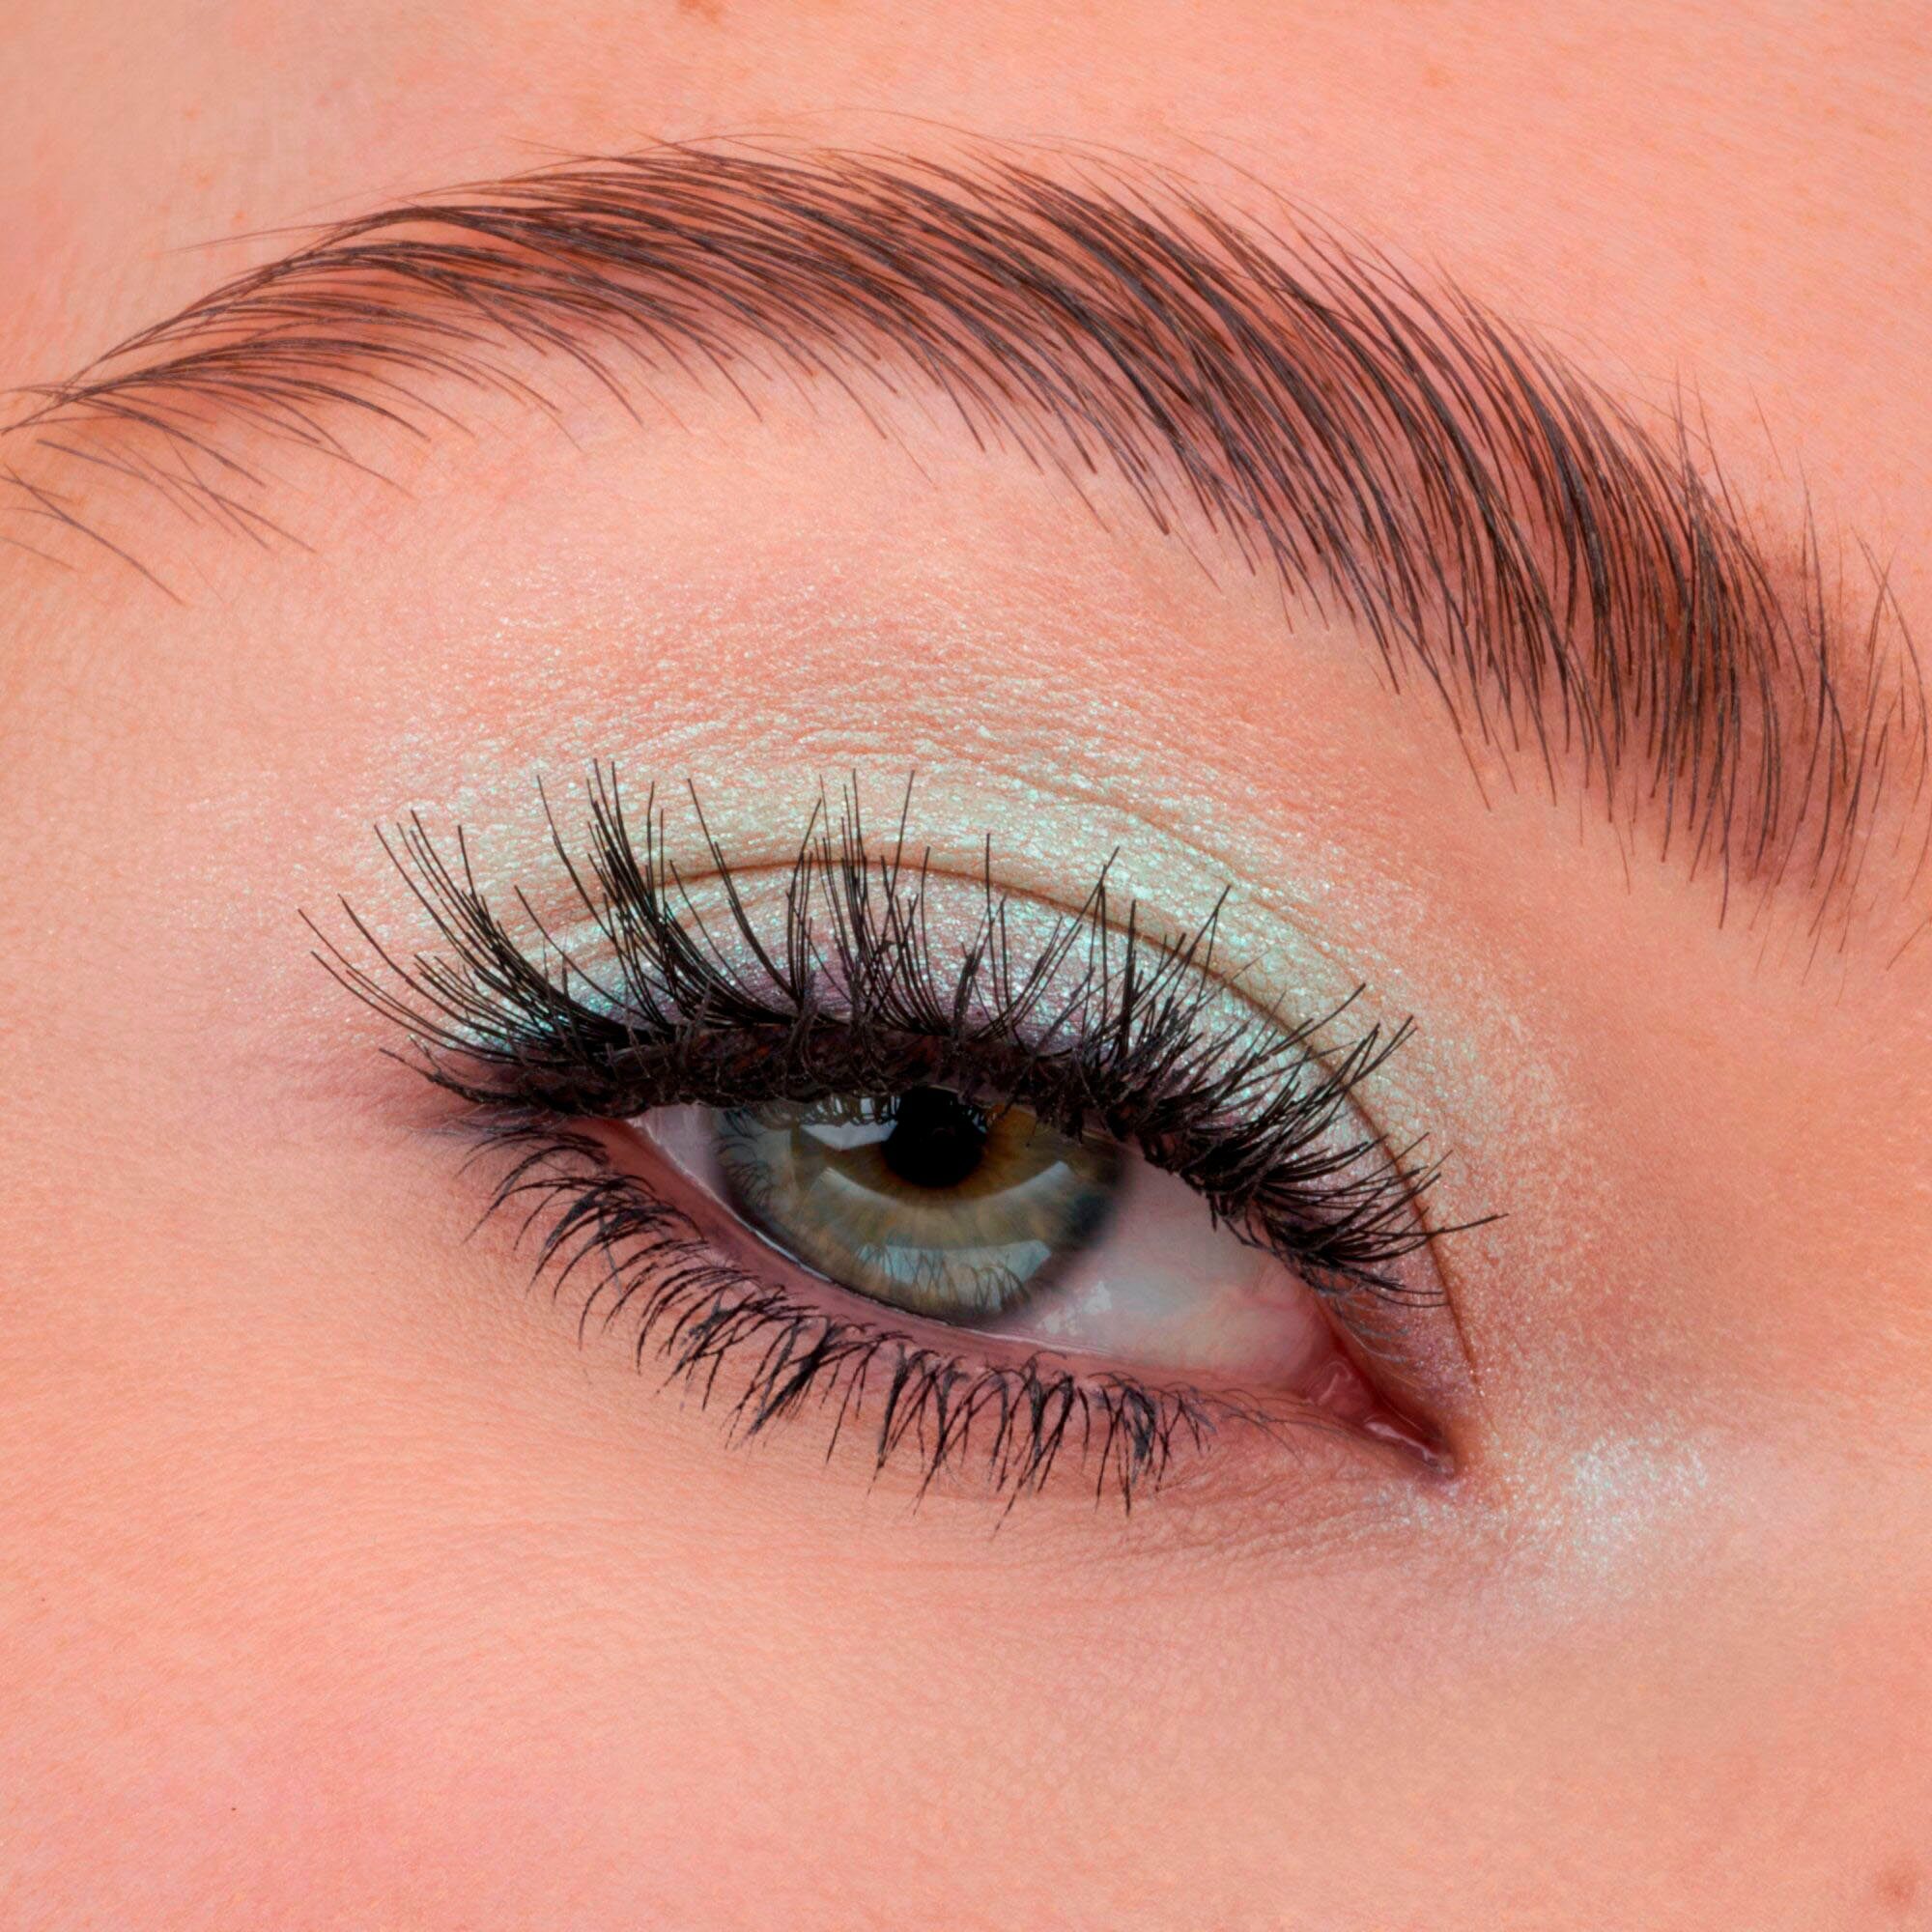 Bandwimpern 3 Extension Lashes, tlg. Set, Ultimate Catrice Faked